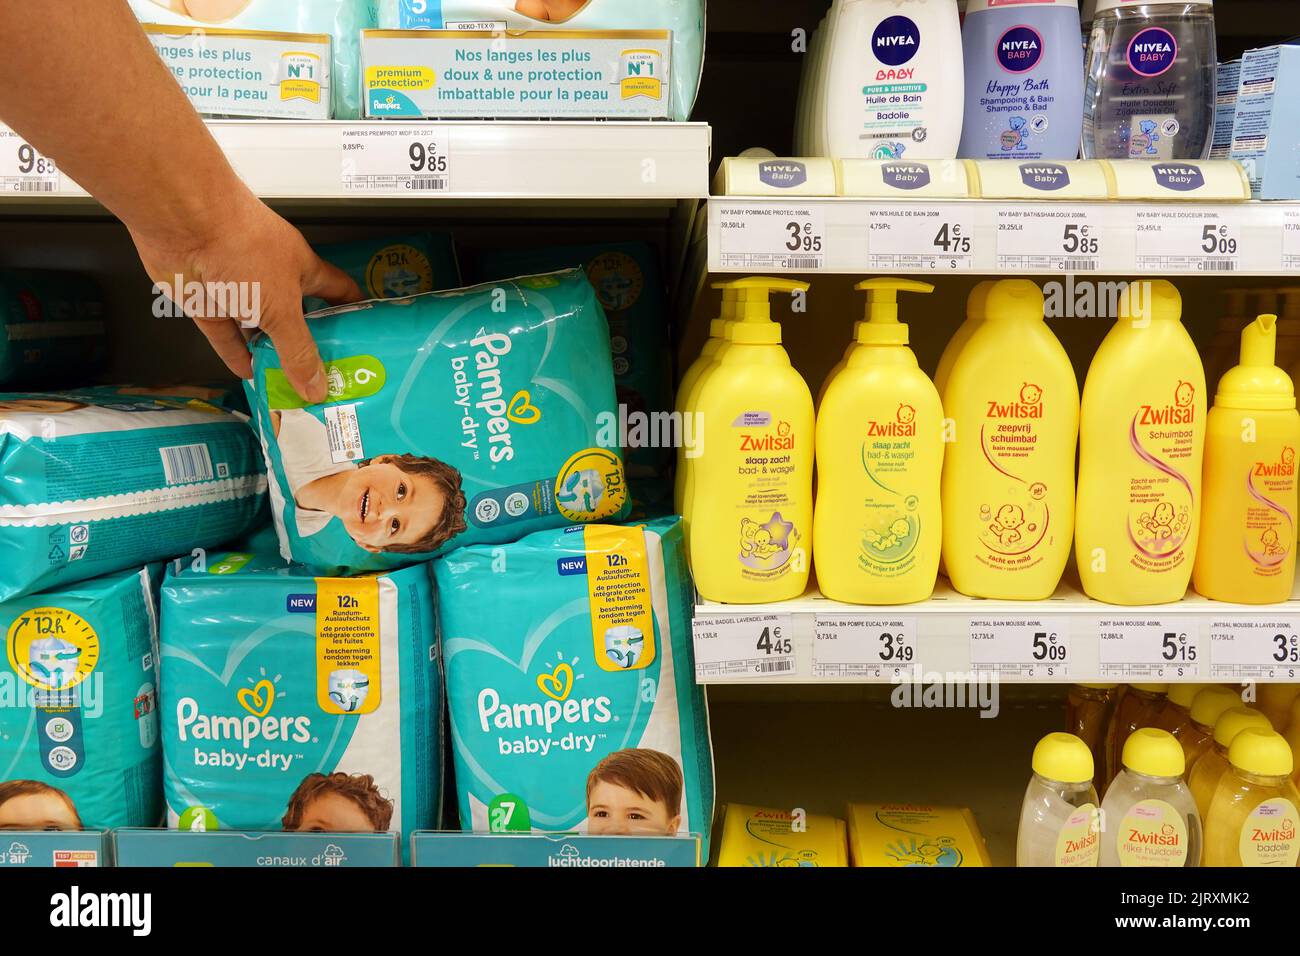 Diapers for sale in a supermarket Stock Photo